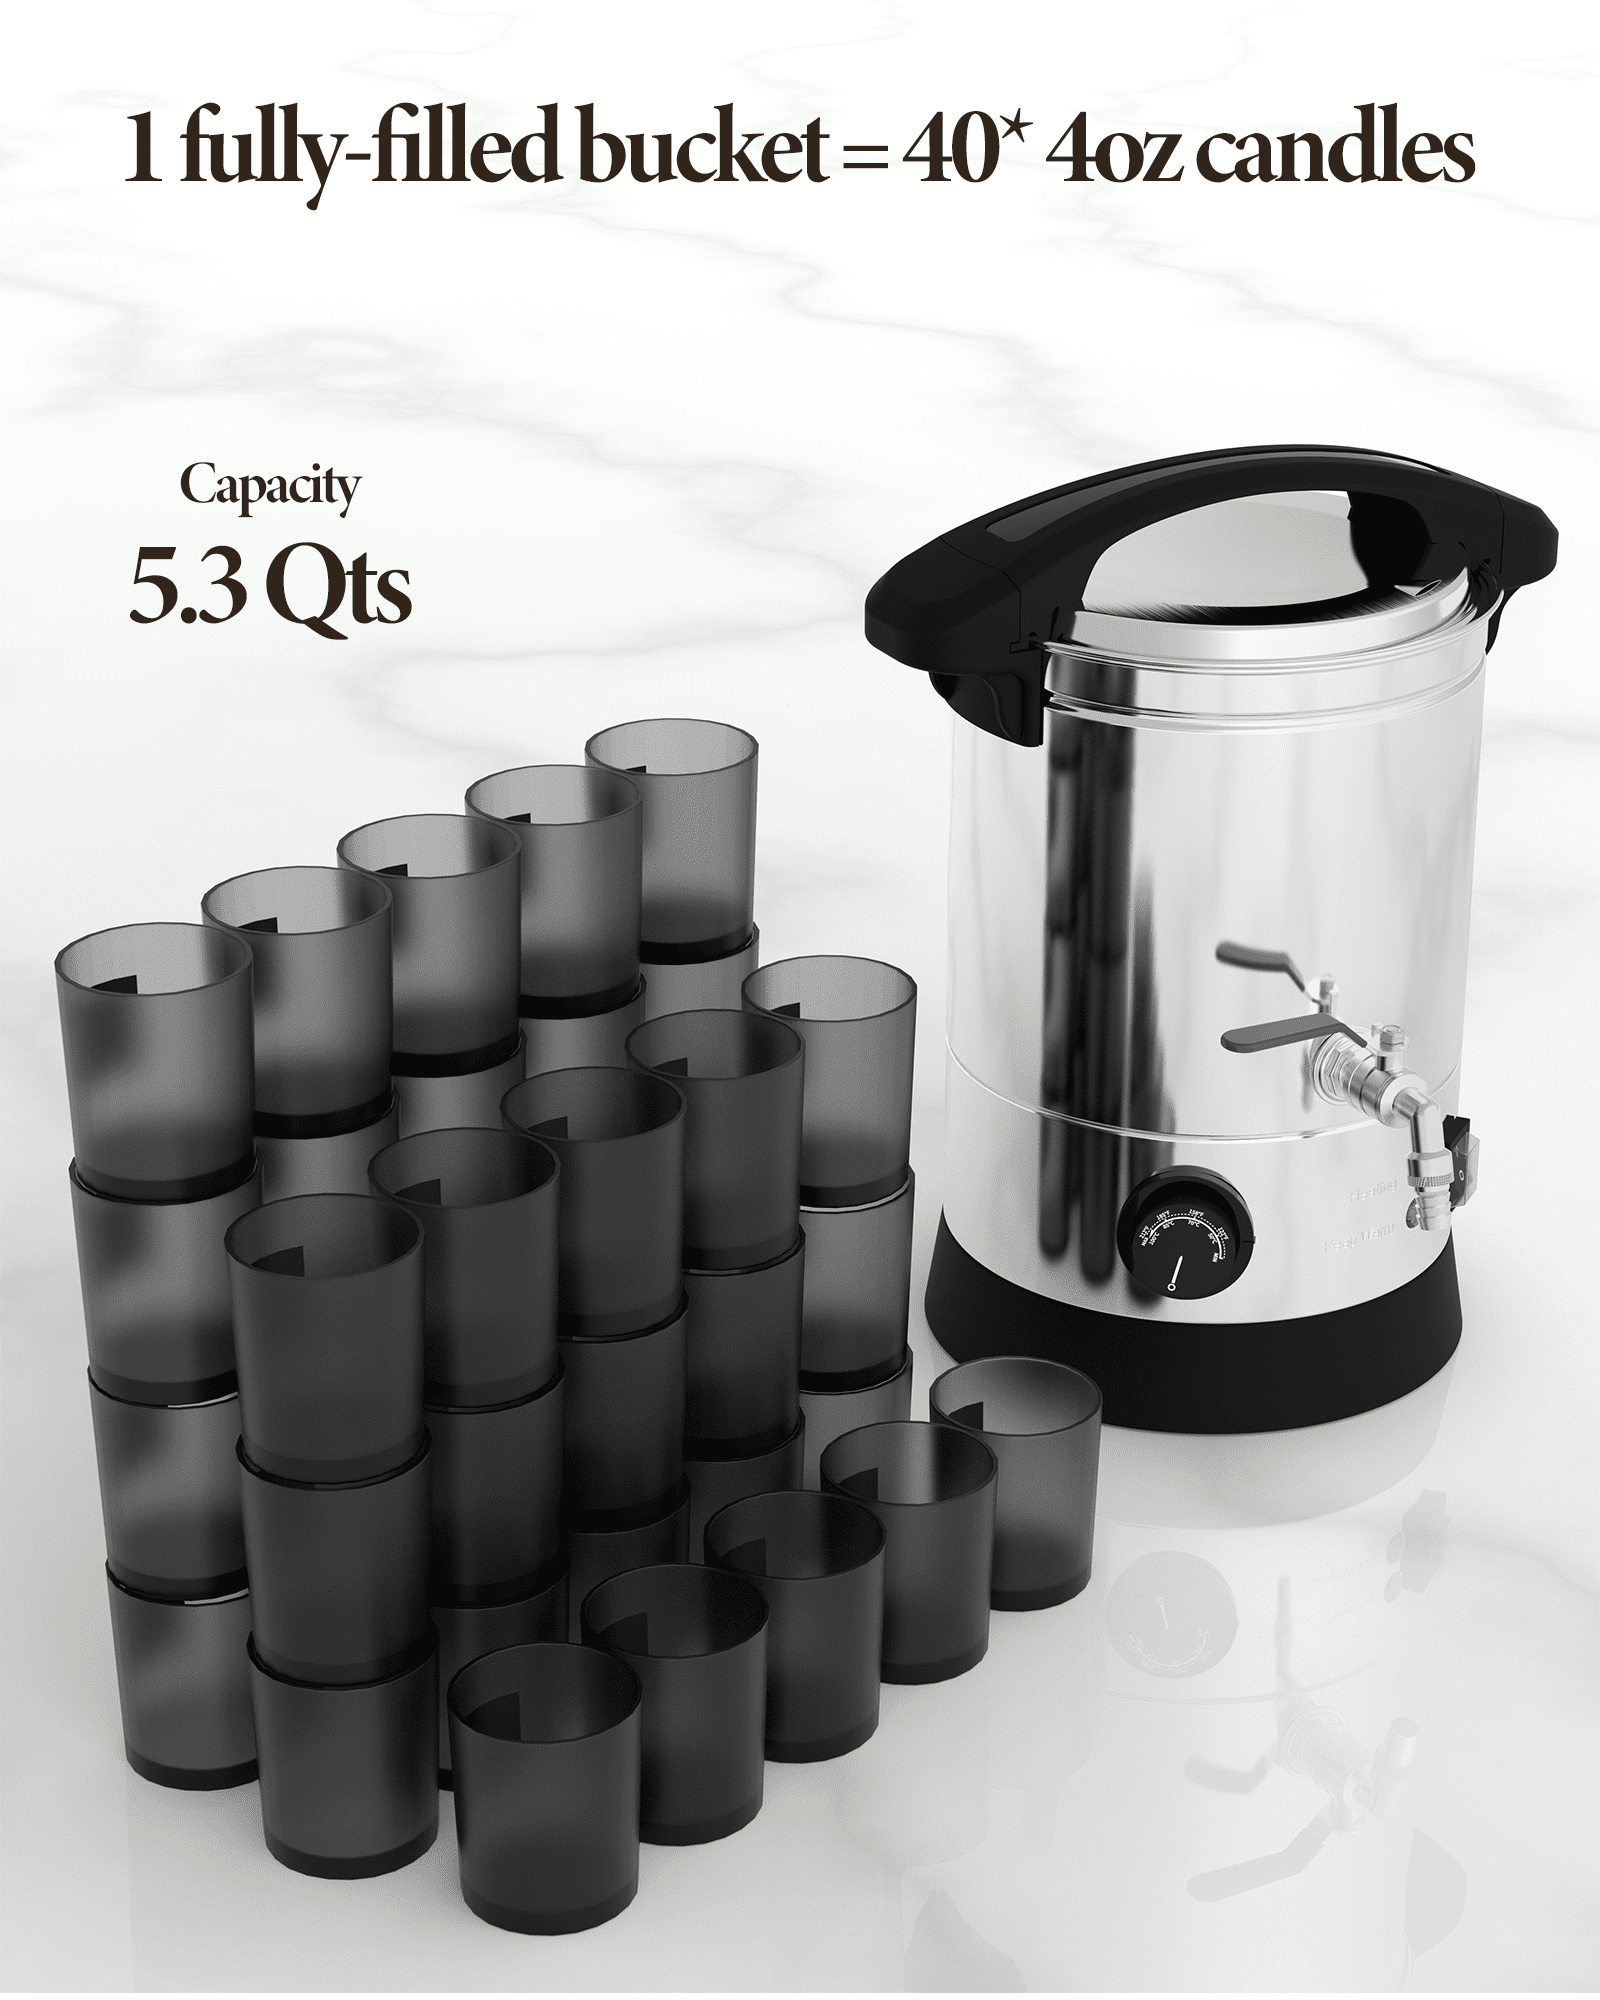  Sutomlo Large 4.5 Qts Electric Wax Melter for Candle Making,  Candle Wax Melting Pot with Temperature Control & Pour Spout for Candle  Maker & Candle Making Business